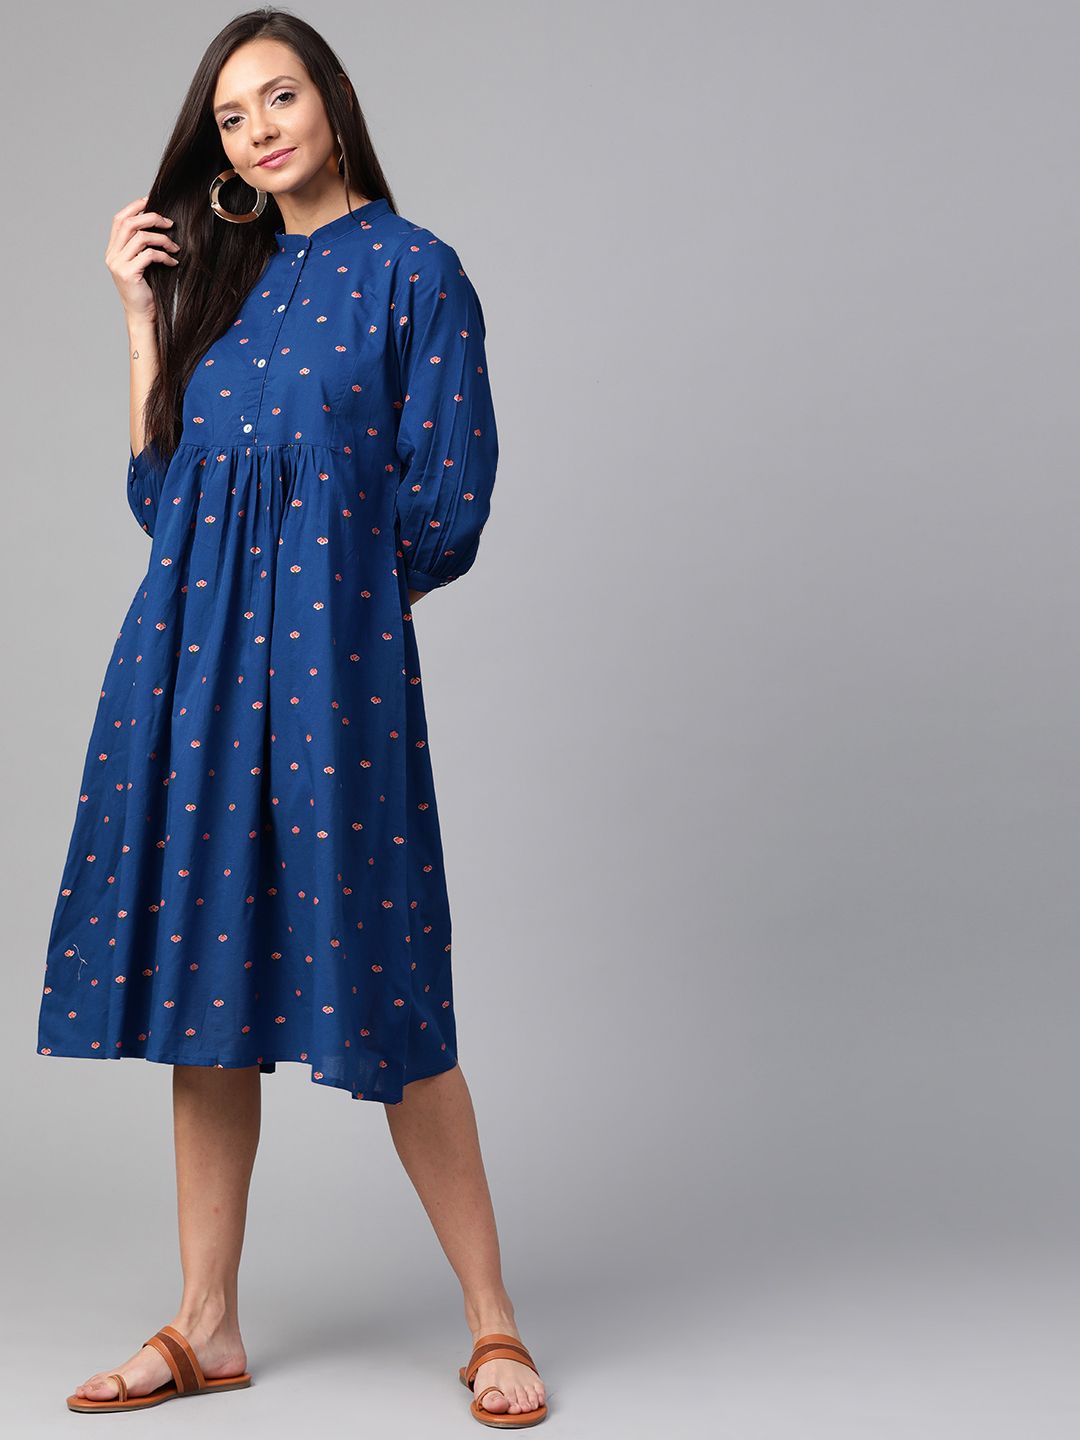 Sangria Navy Blue & Coral Pink Floral Printed Cotton A-Line Dress Price in India